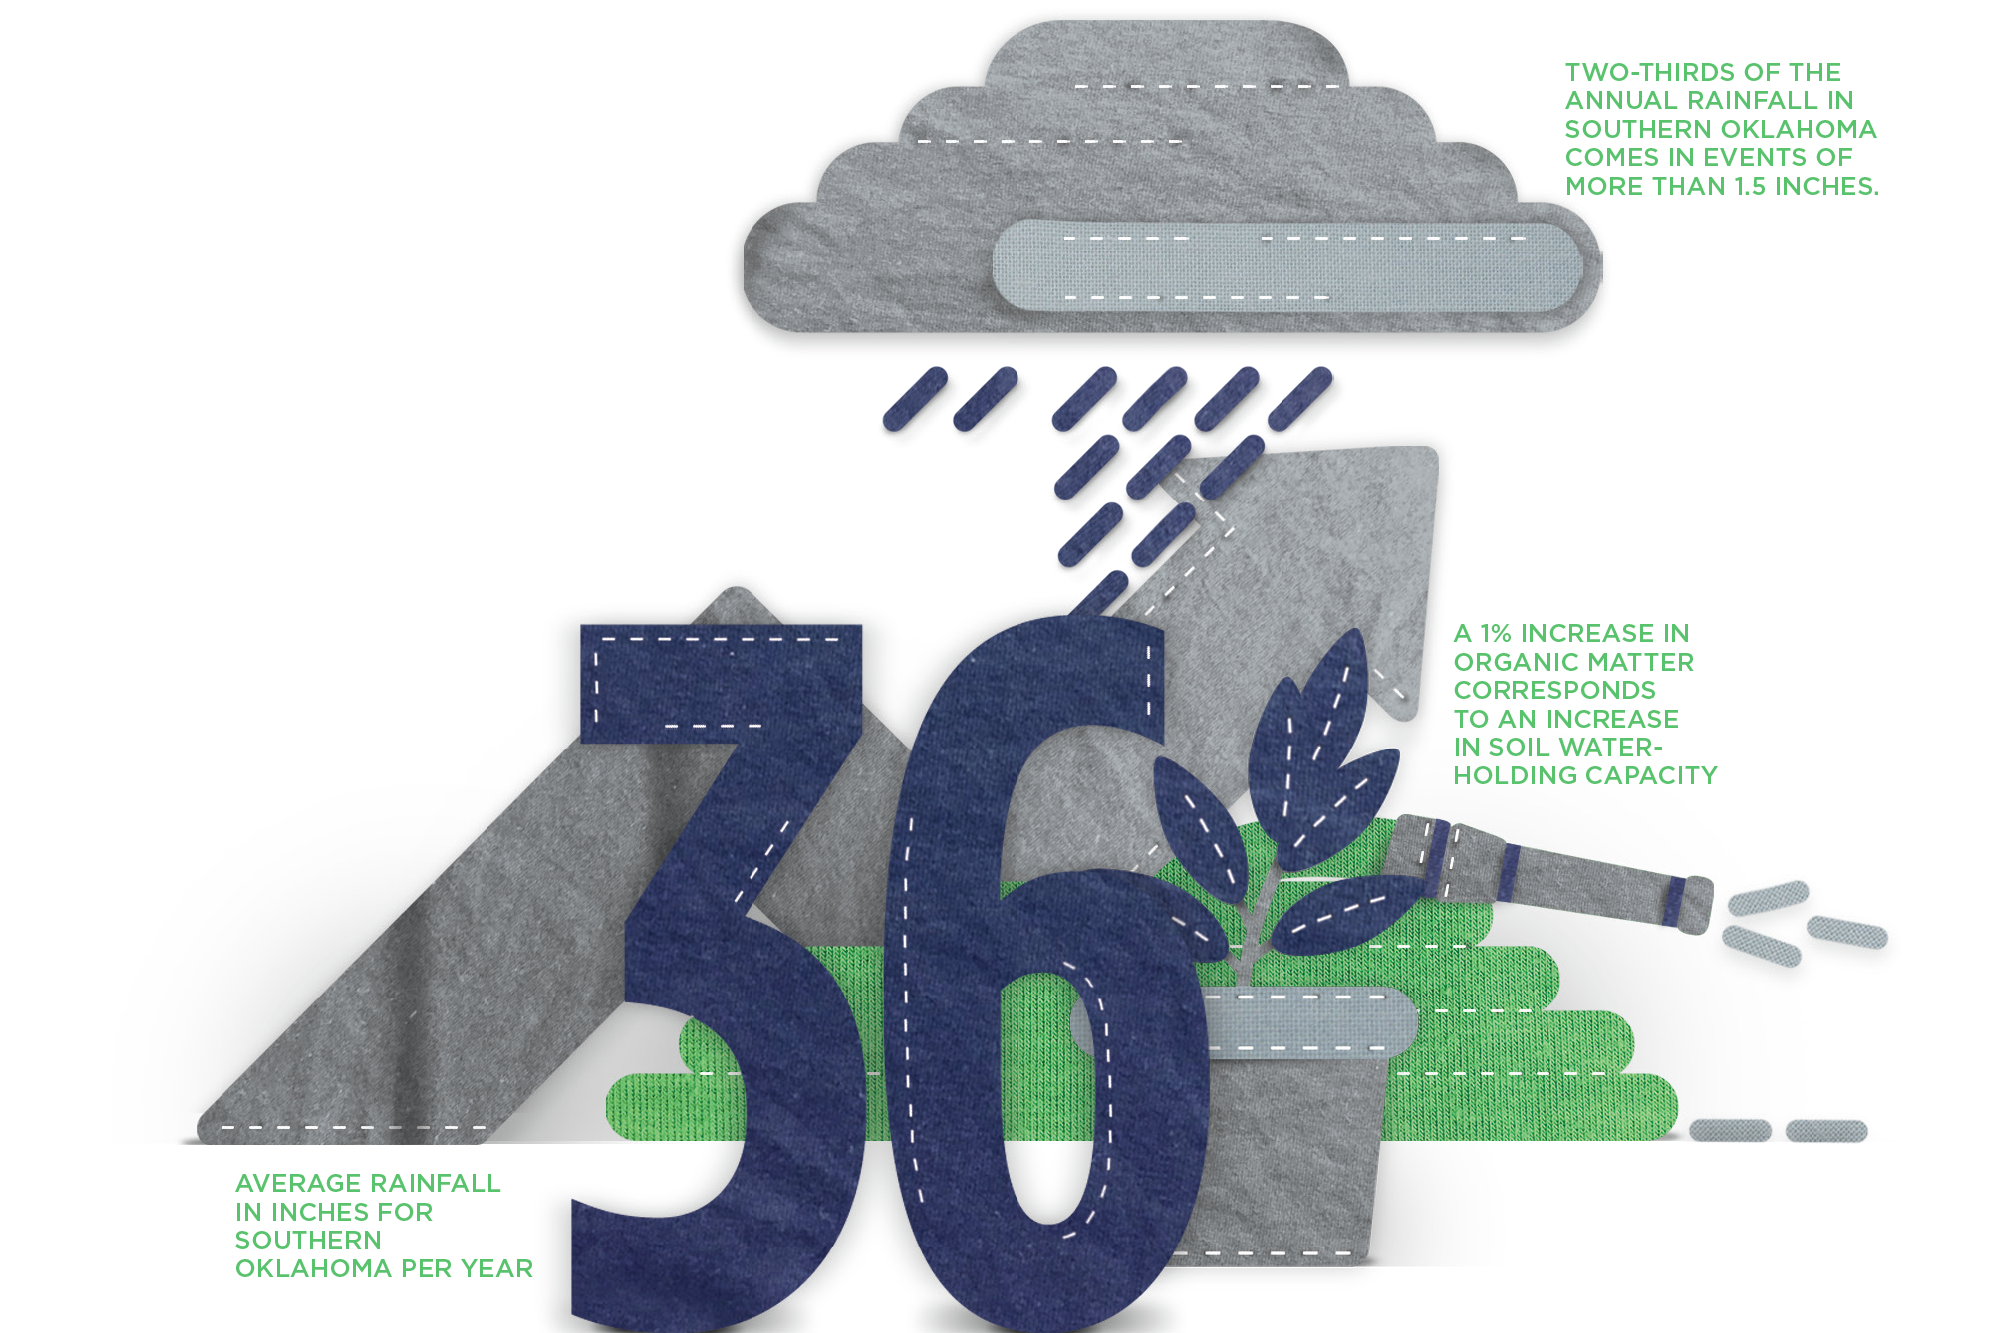 Infographic showing common statistics about rainfall: 
Two-thirds of the annual rainfall in Southern Oklahoma comes in events of more than 1.5 inches. 
A1% increase in organic matter corresponds to an increase in soil water holding capacity. 
Southern Oklahoma receives an average of 36 inches of rainfall per year.